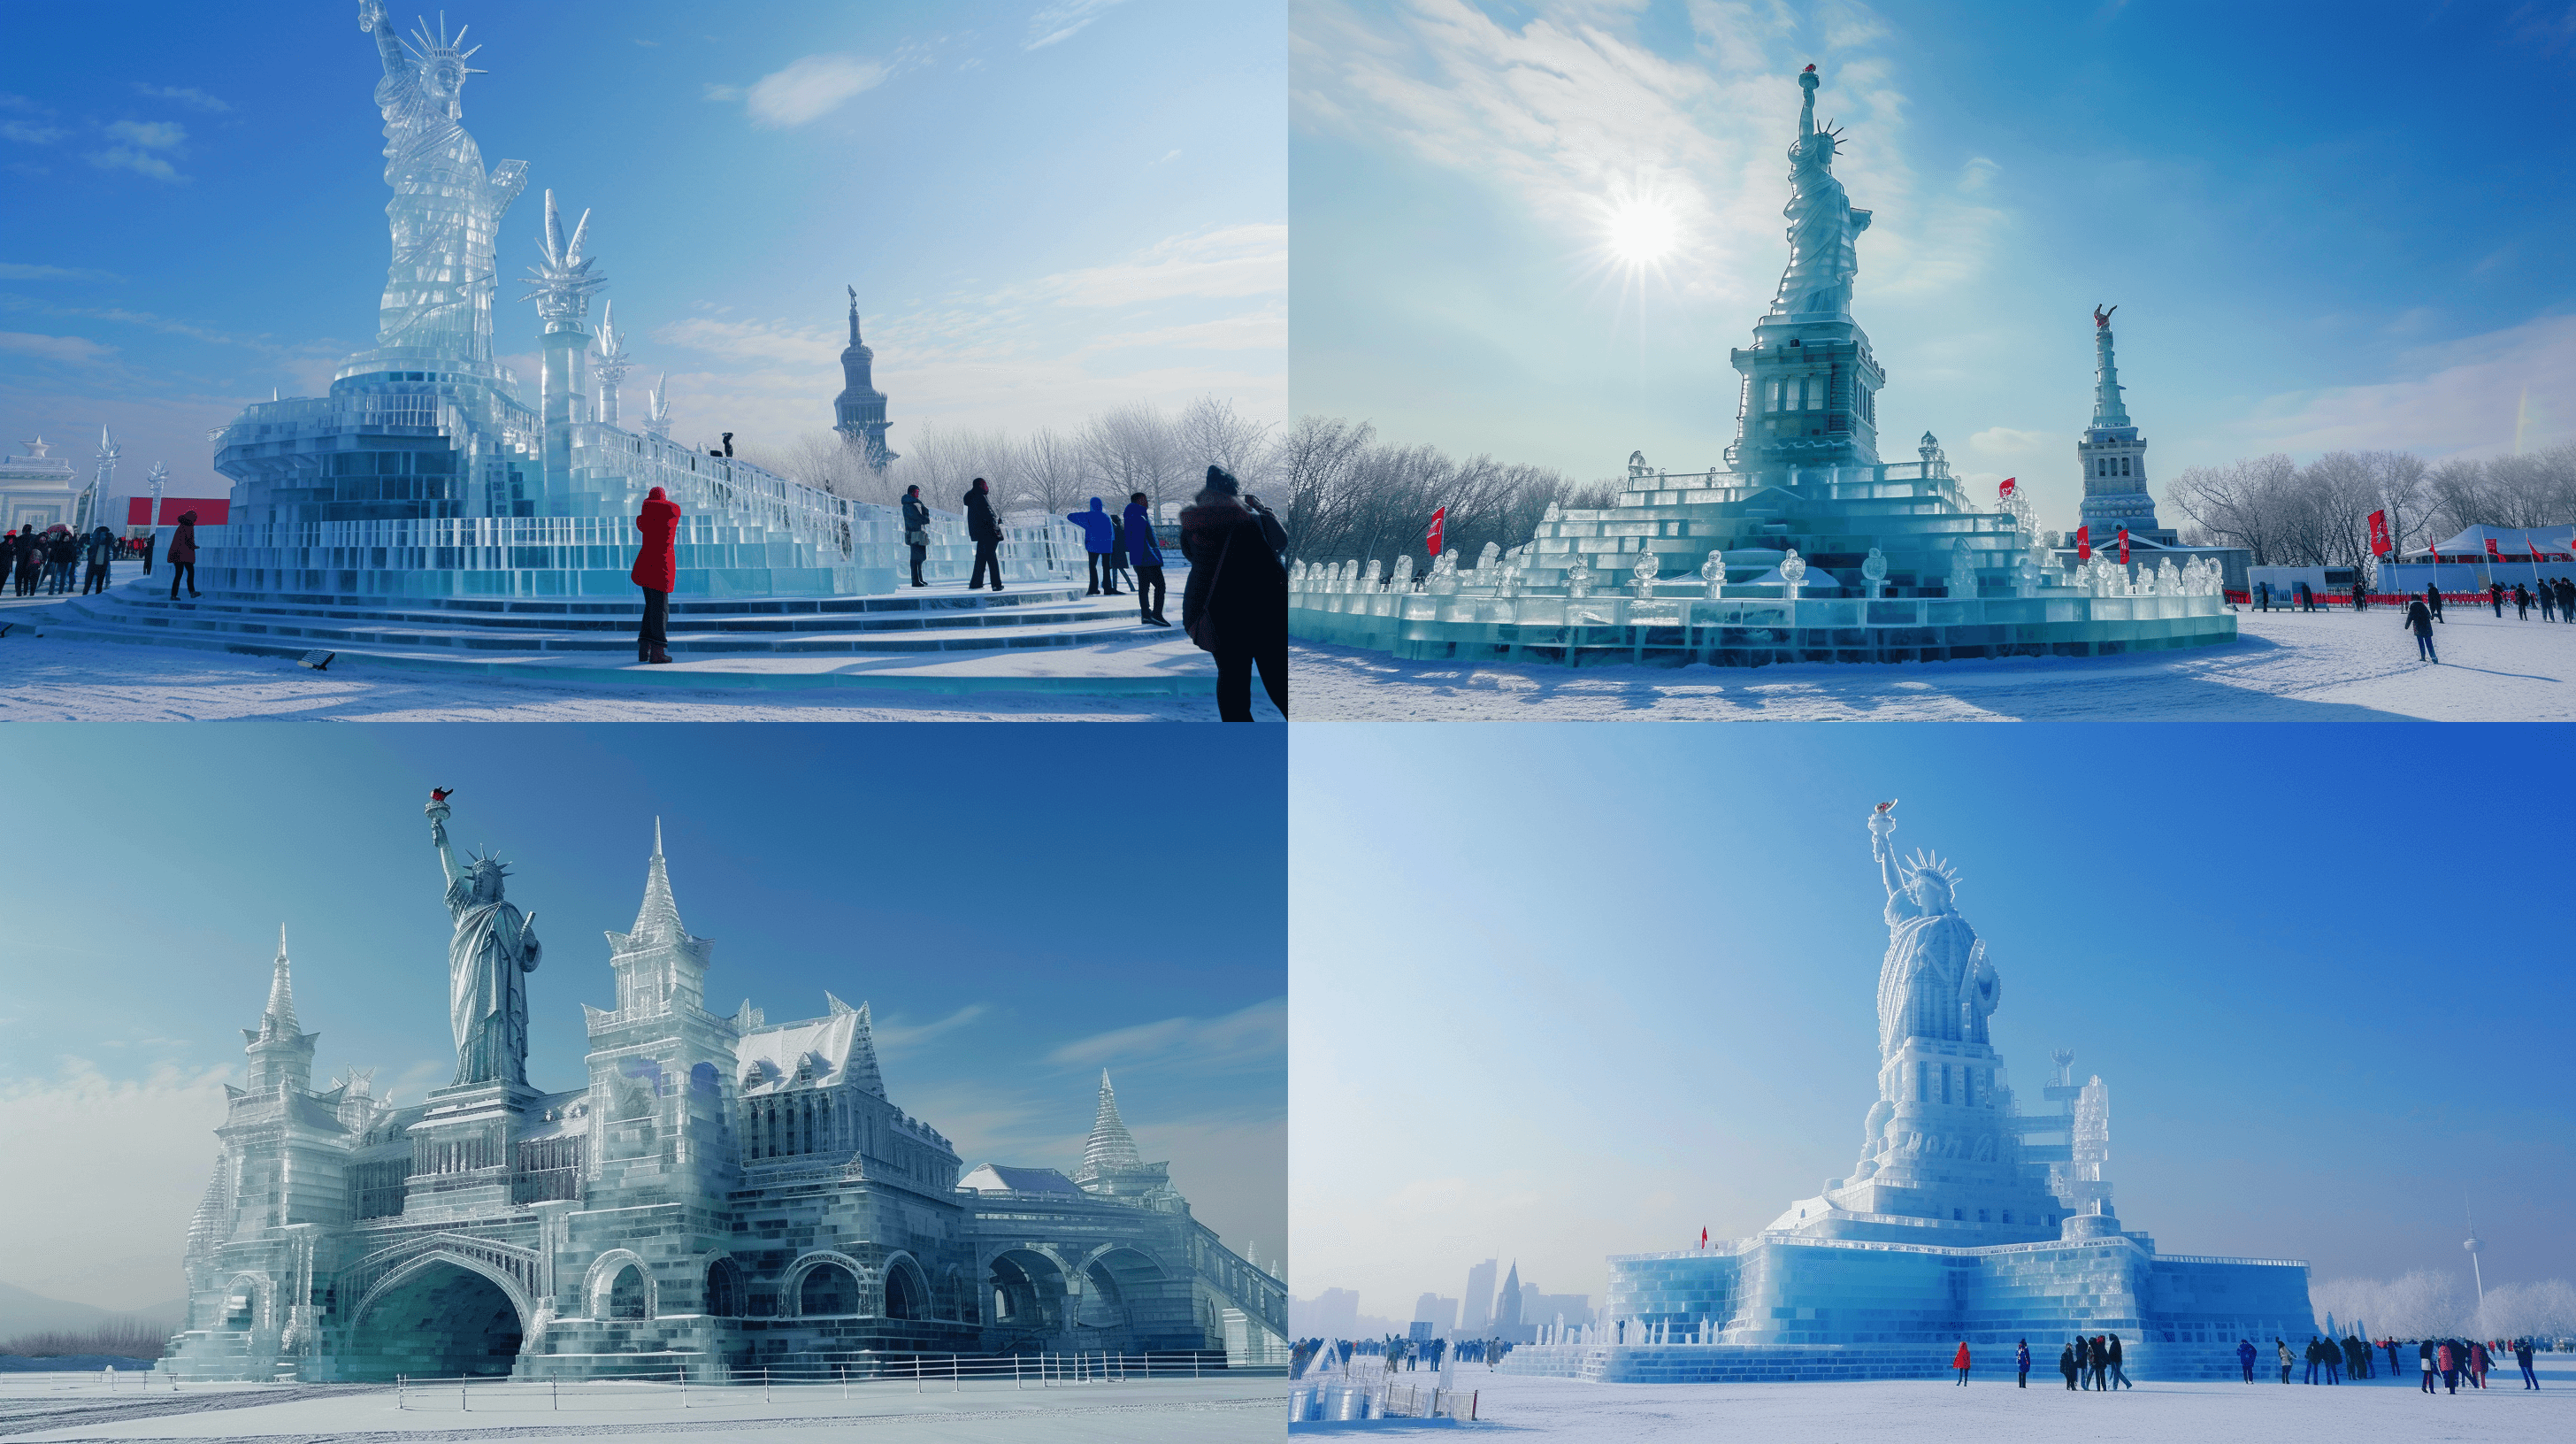 Harbin ice and snow world style, Ice sculpture, The Statue of Liberty architecture Ice sculpture, Crystal clear ice, daylight, ice art, --ar 16:9